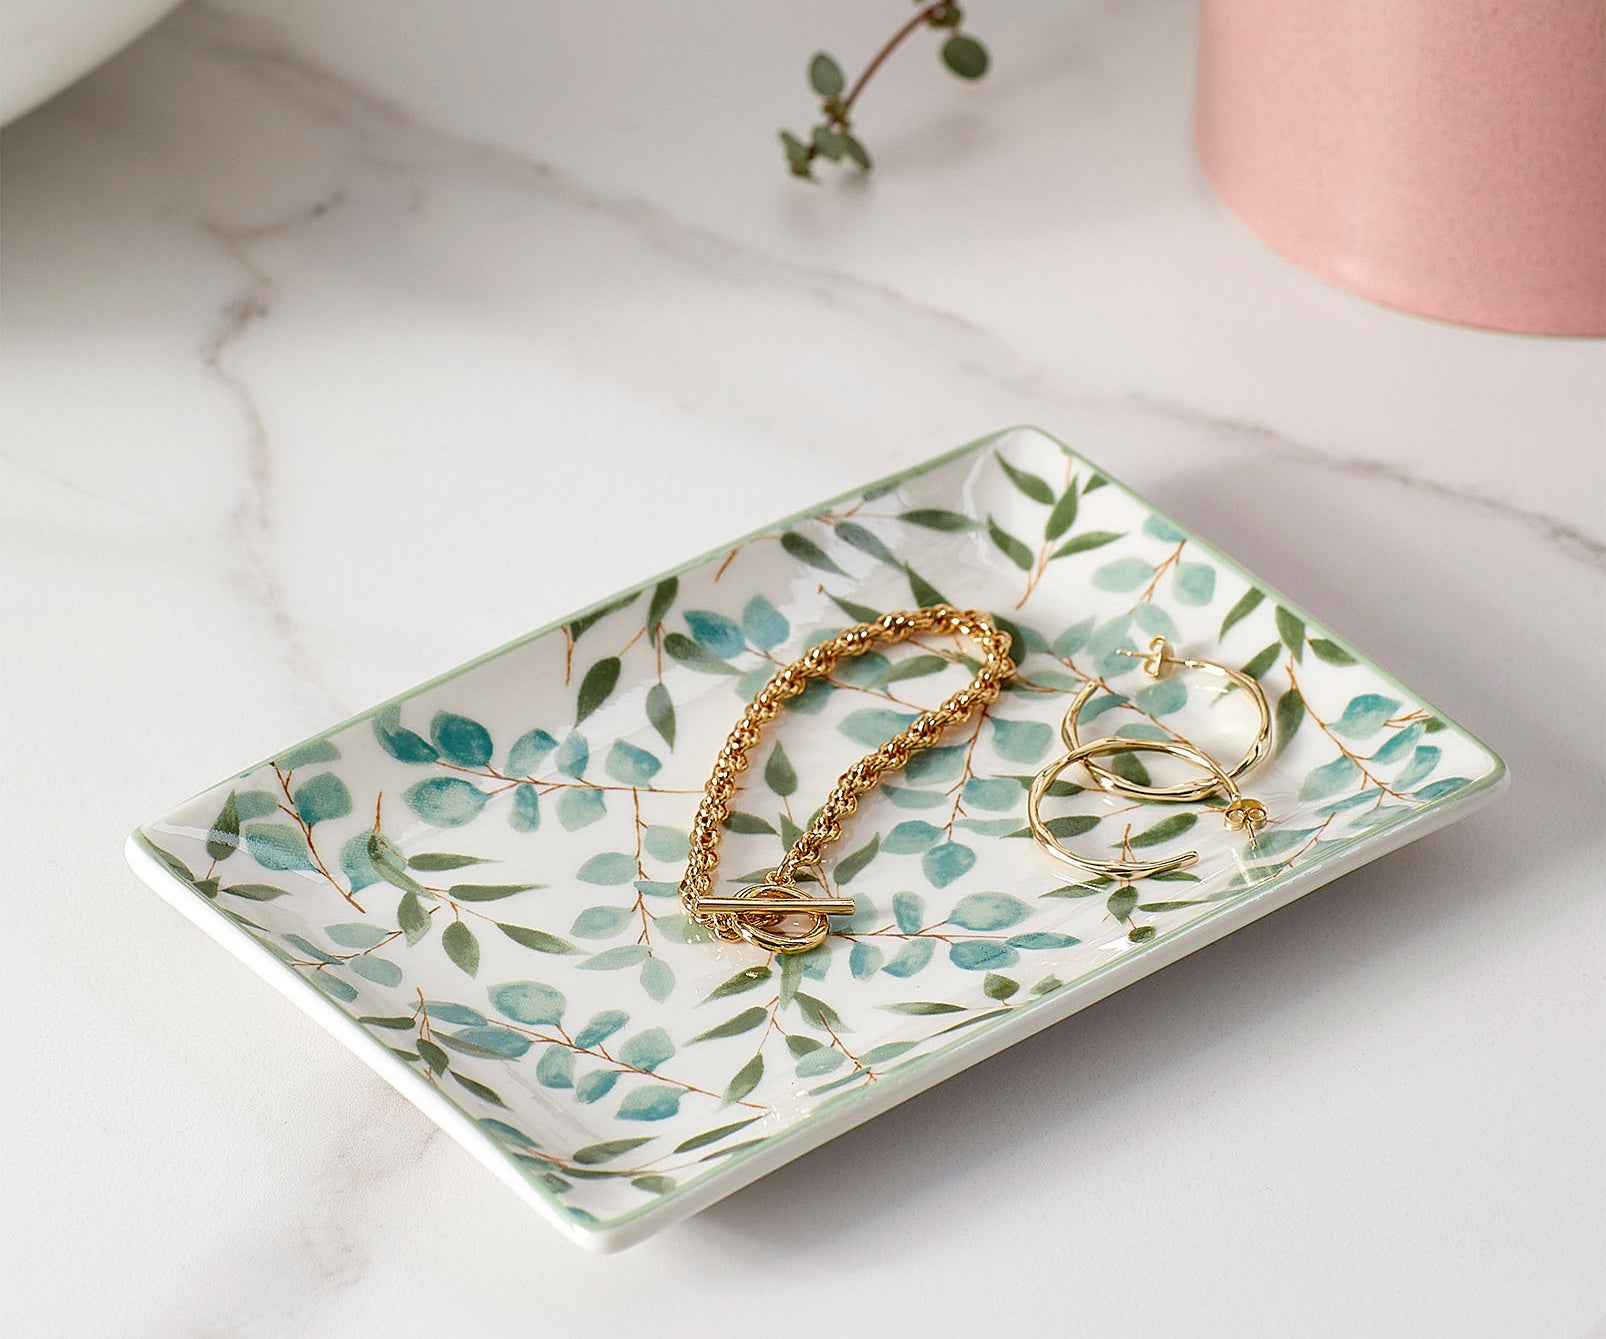 A small ceramic tray with a gold bracelet and pair of earrings on it